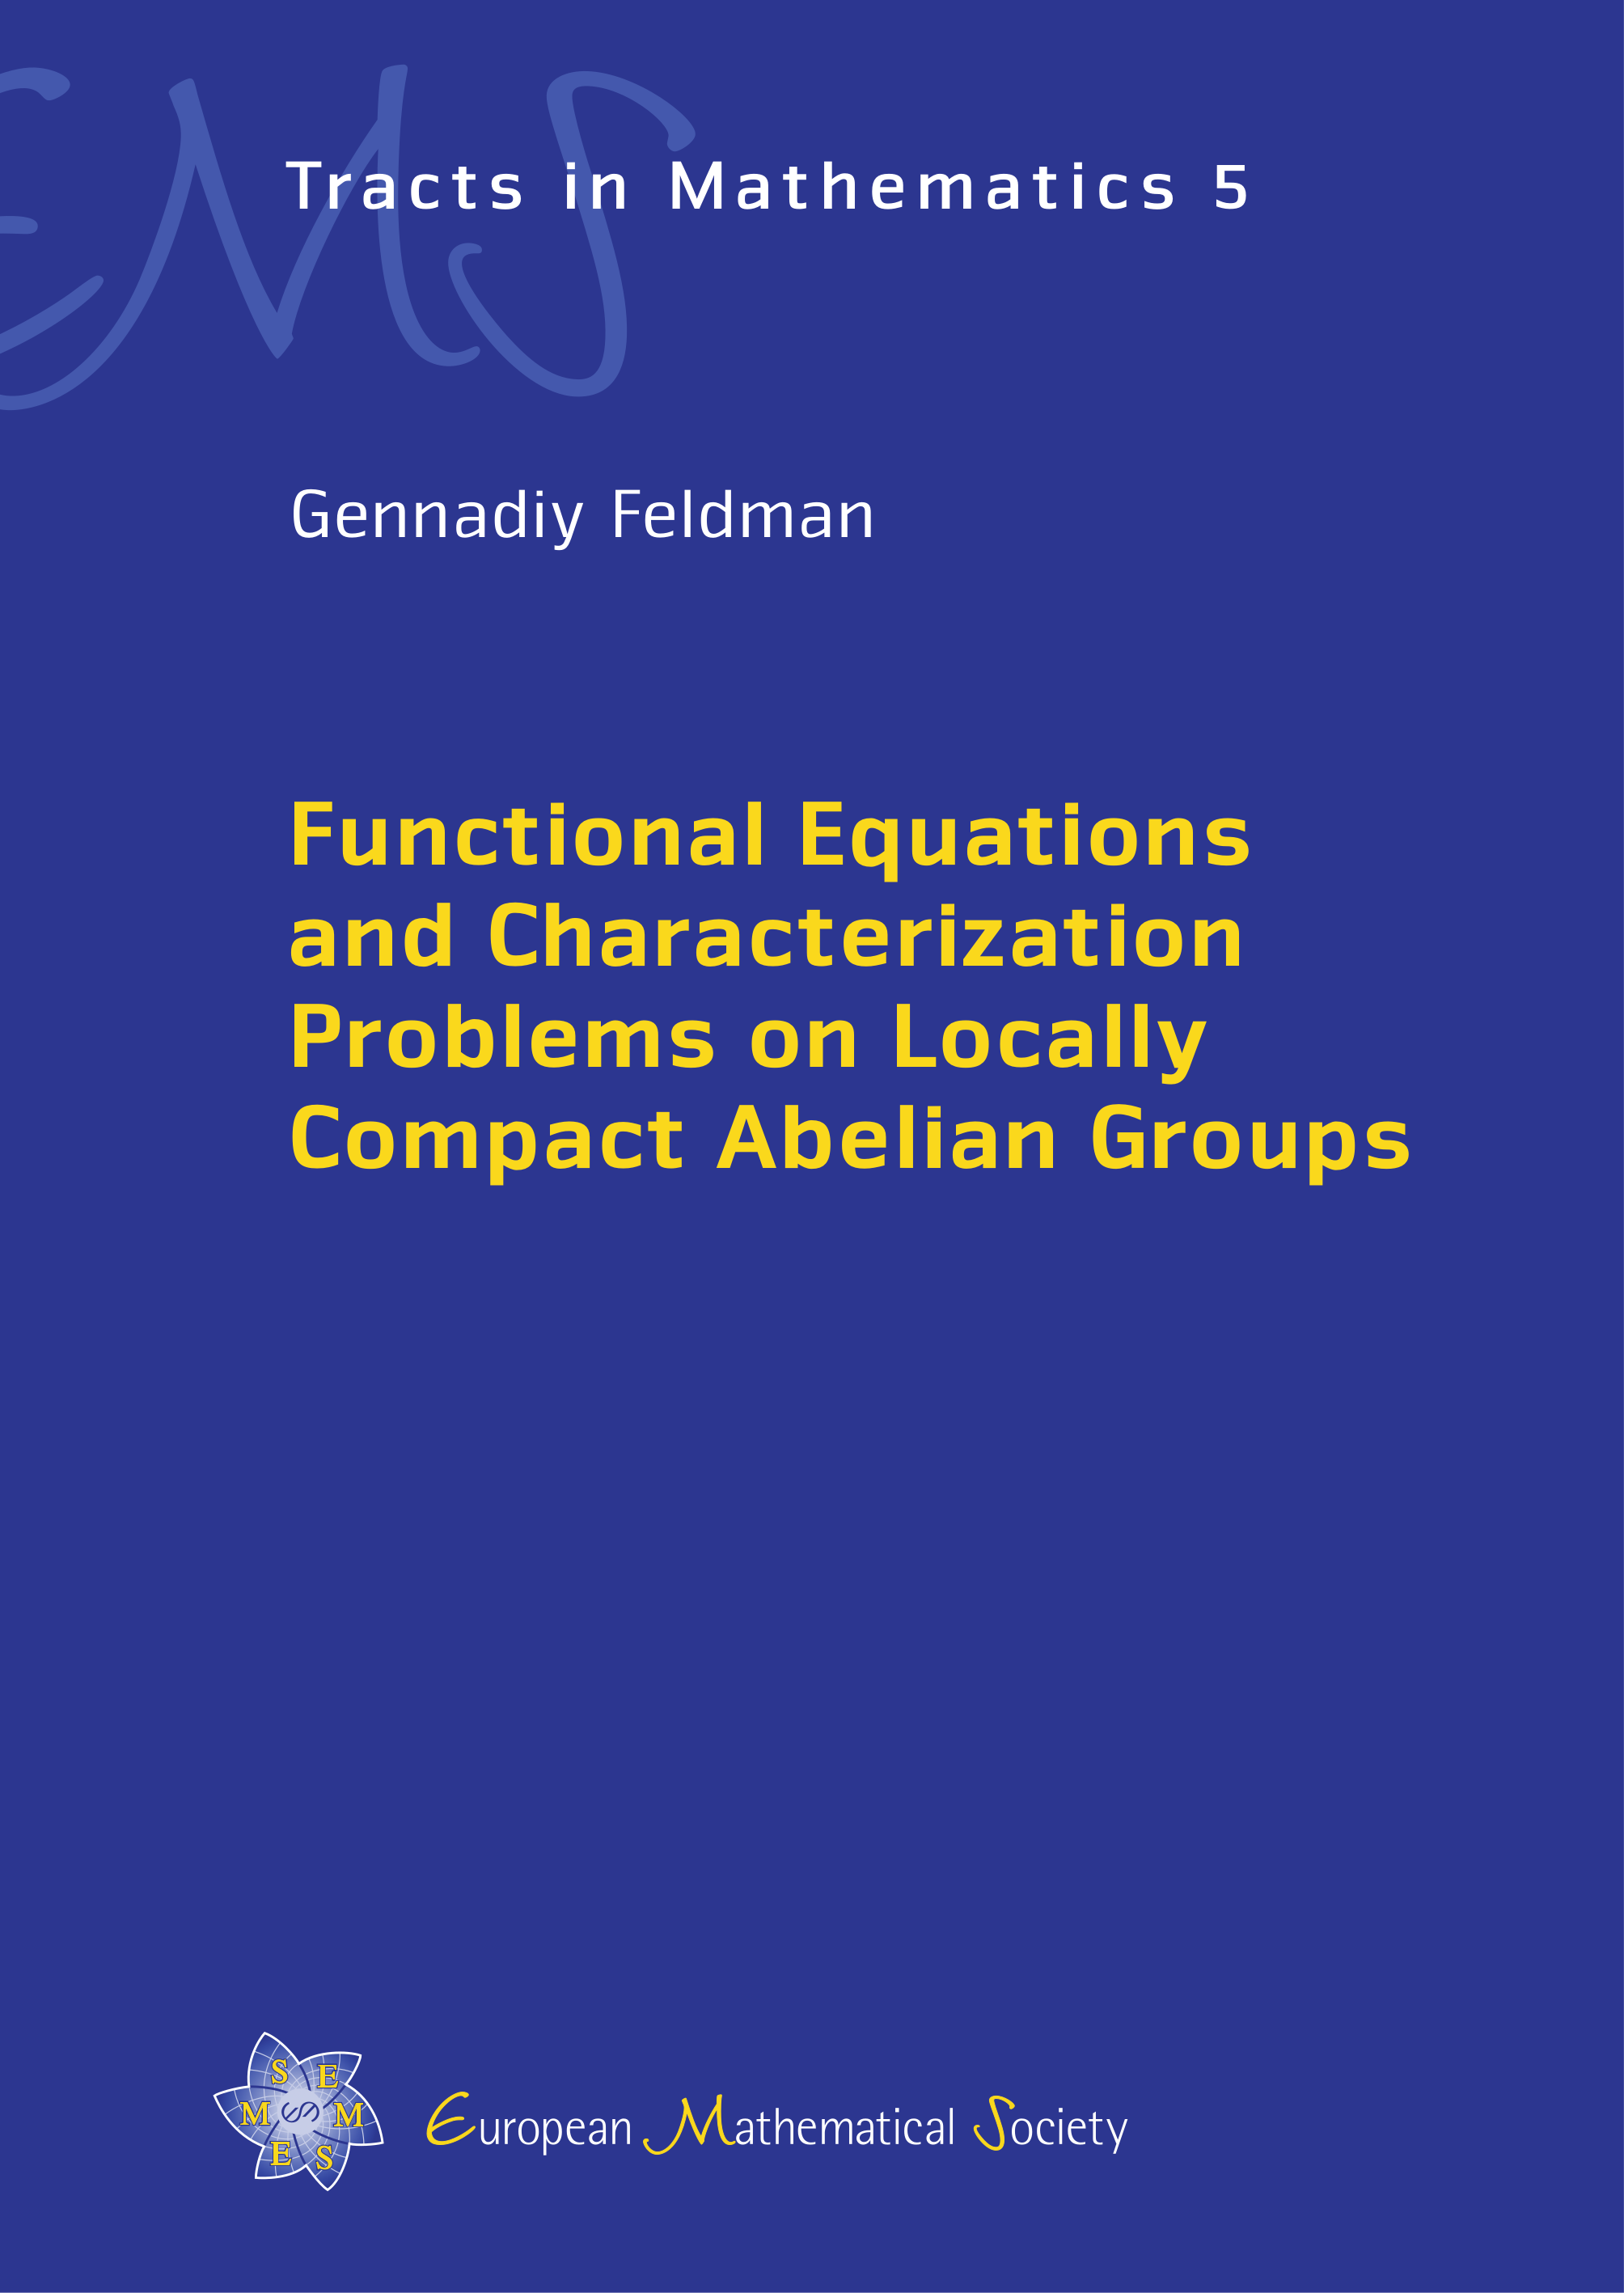 Probability distributions on locally compact Abelian groups cover